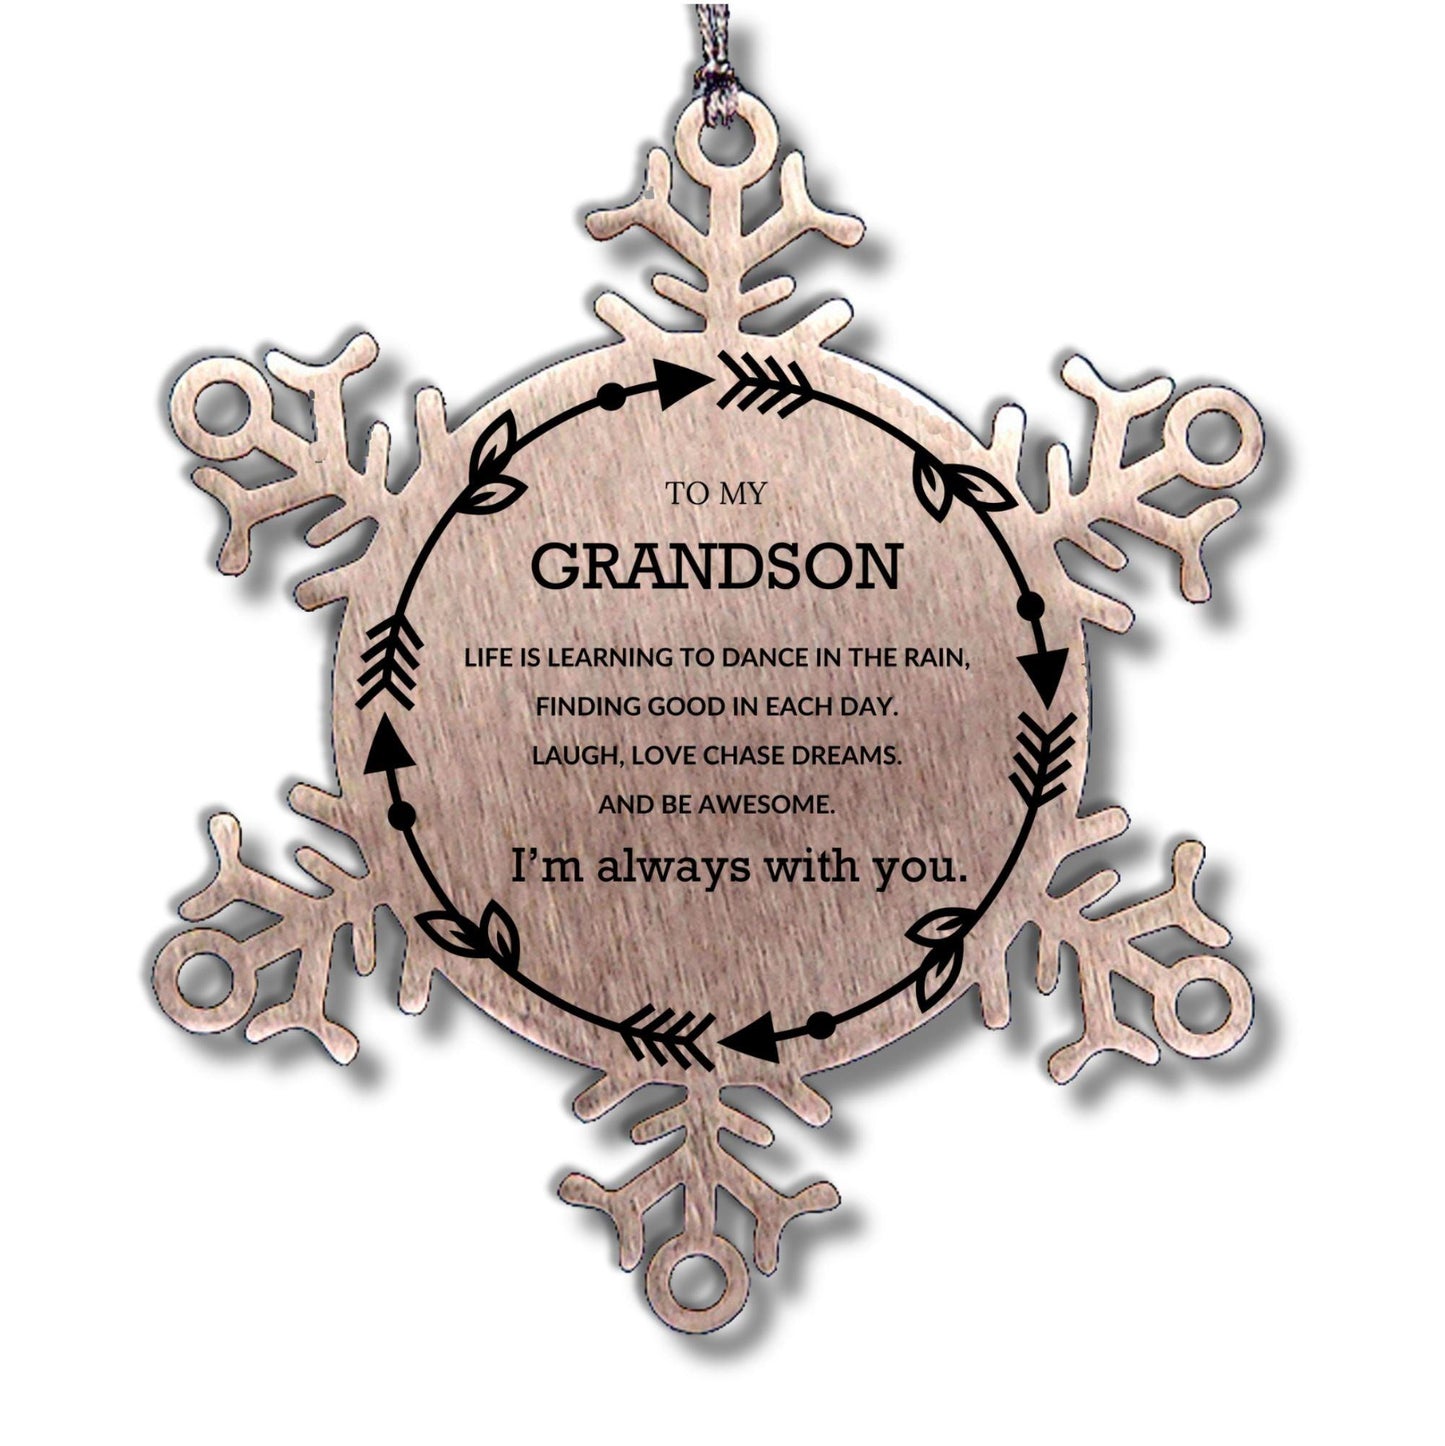 Grandson Christmas Ornament Gifts, Grandson Snowflake Ornament, Motivational Grandson Engraved Gifts, Birthday Gifts For Grandson, Life is learning to dance in the rain, finding good in each day. I'm always with you